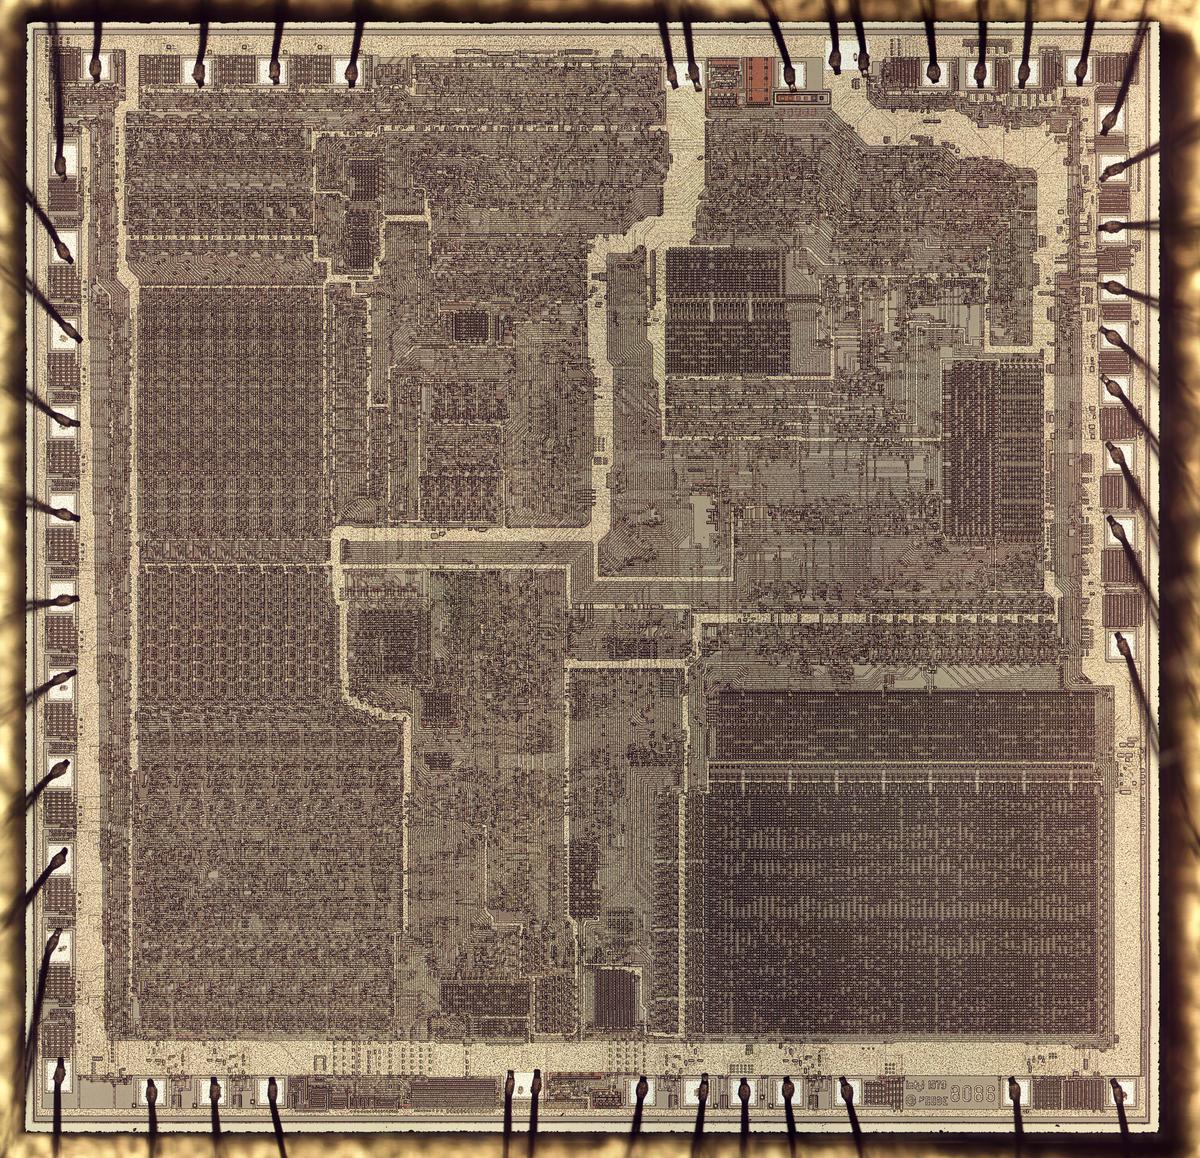 A die photo of the 8086 processor. The metal layer on top of the silicon is visible. Around the edge of the chip, bond wires provide connections to the chip's external pins. Click this image (or any other) for a larger version.